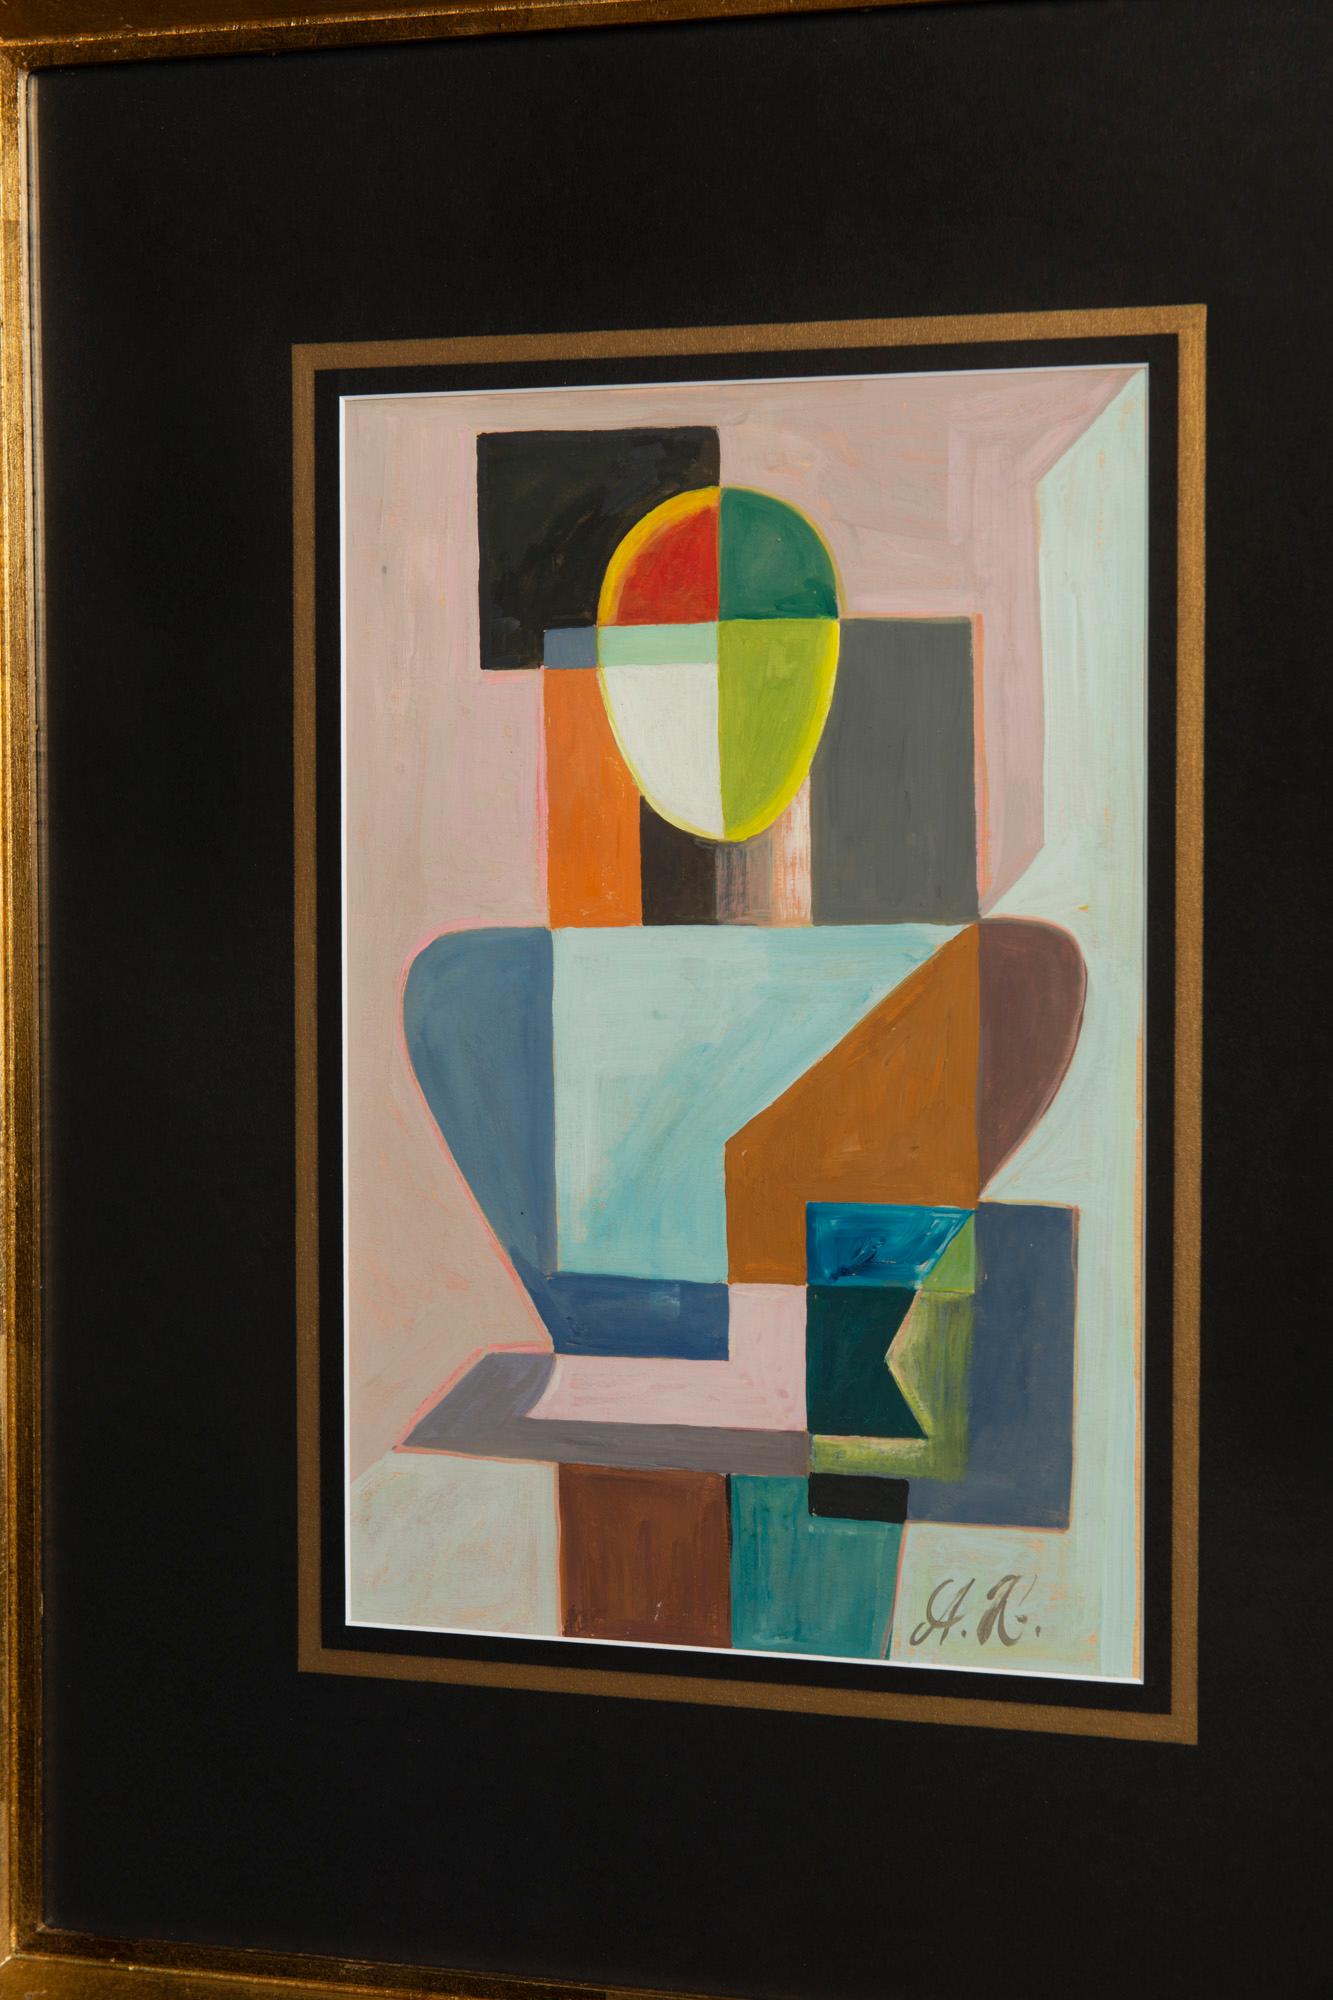 20th century cubist modernist French tempera on paper signed A.R. 1960.